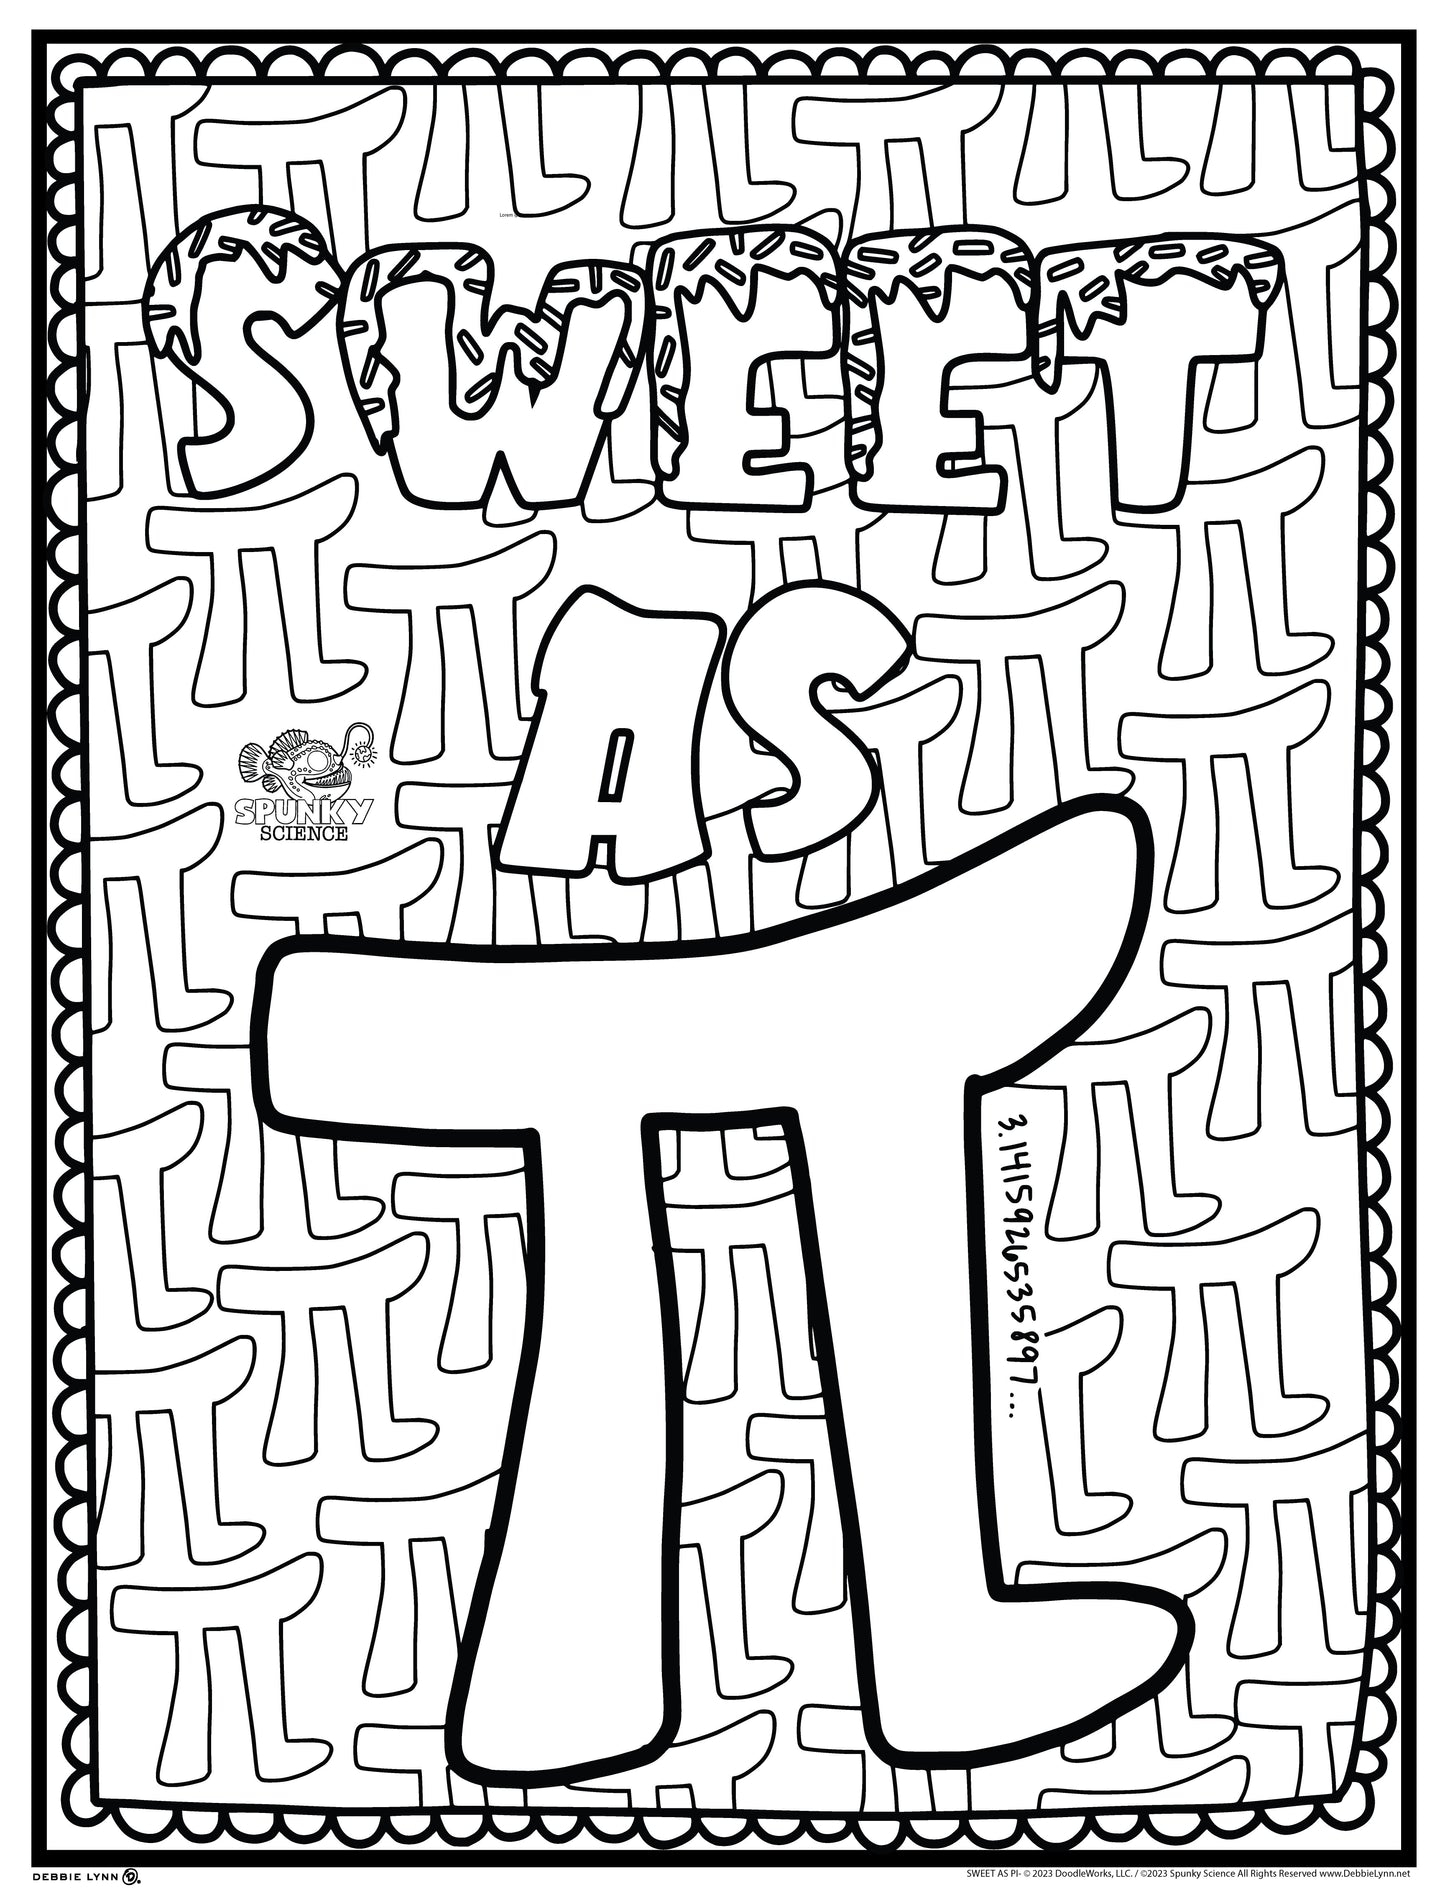 Sweet as pi spunky science personalized giant coloring poster x â debbie lynn